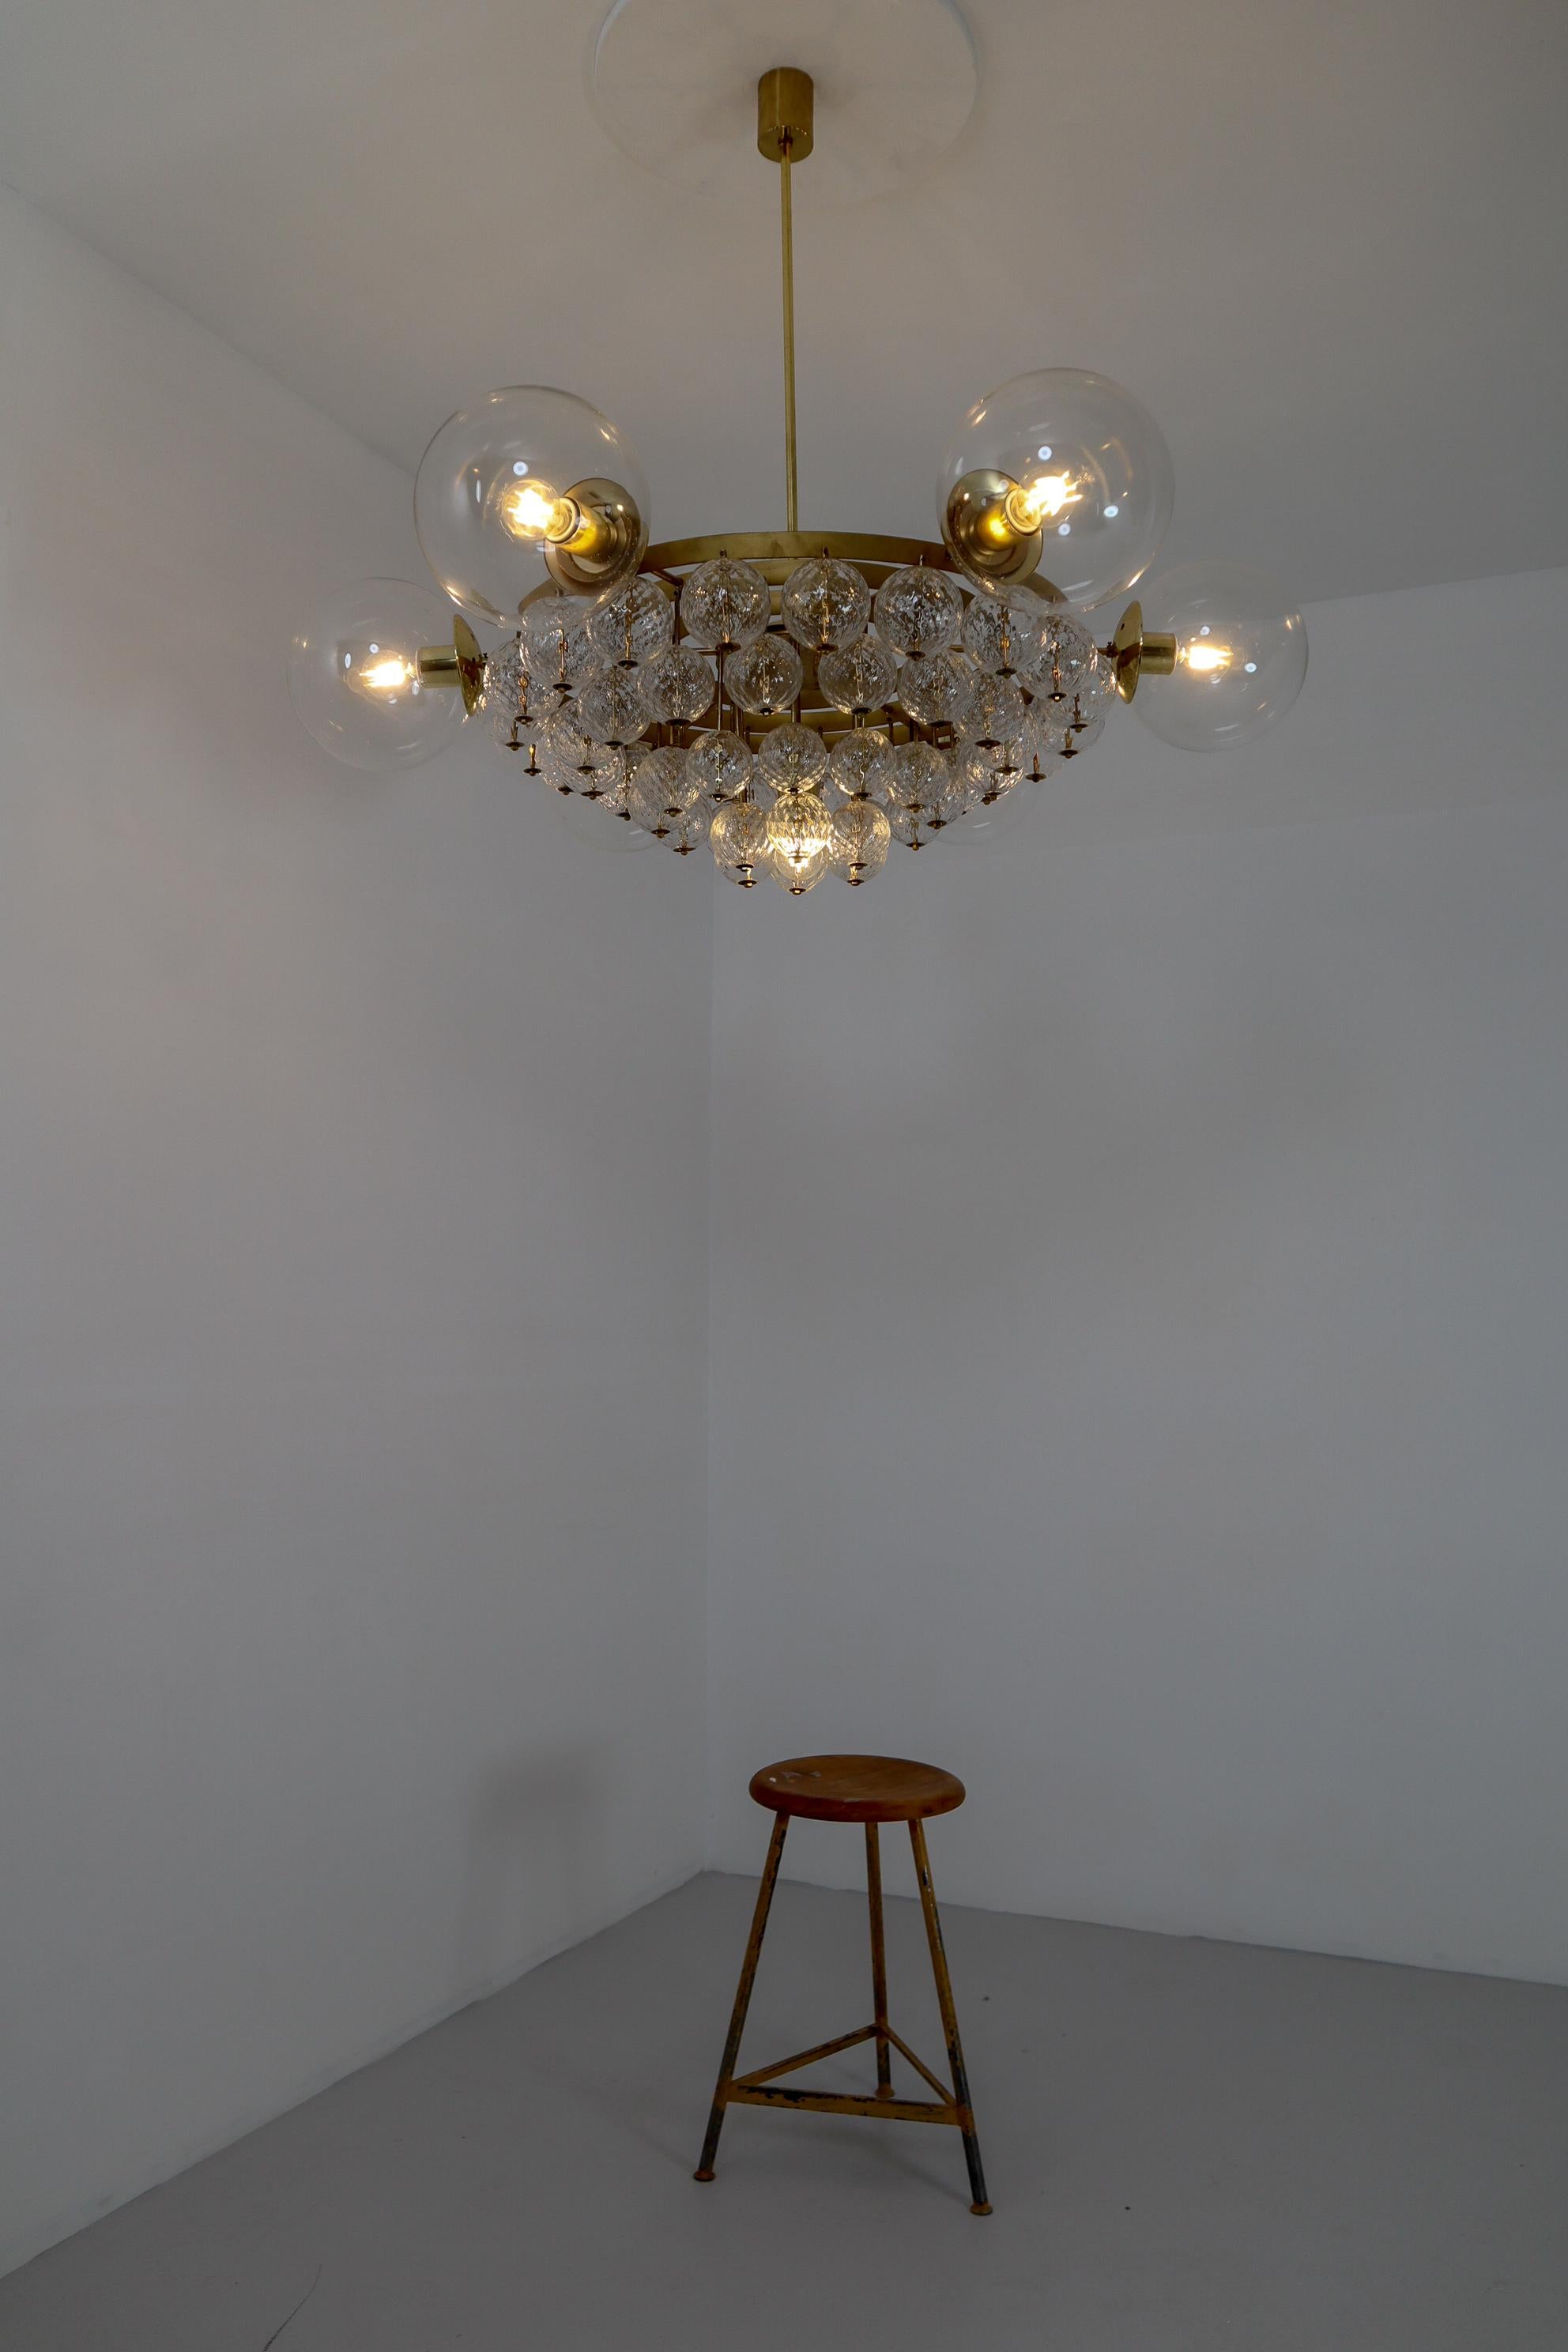 Mid-Century Modern Large Mid-Century Chandelier with Brass Fixture and Structured Glass Globes